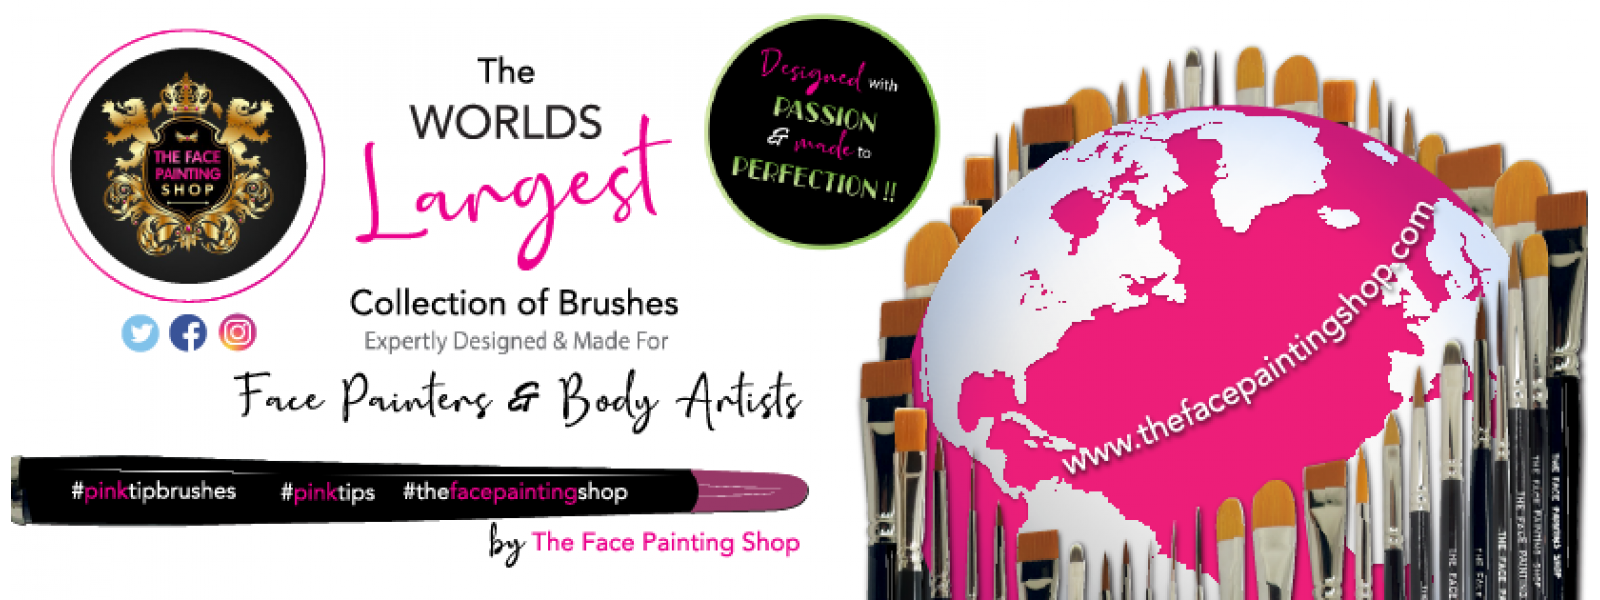 The Face Painting Shop Pink Tip Brushes